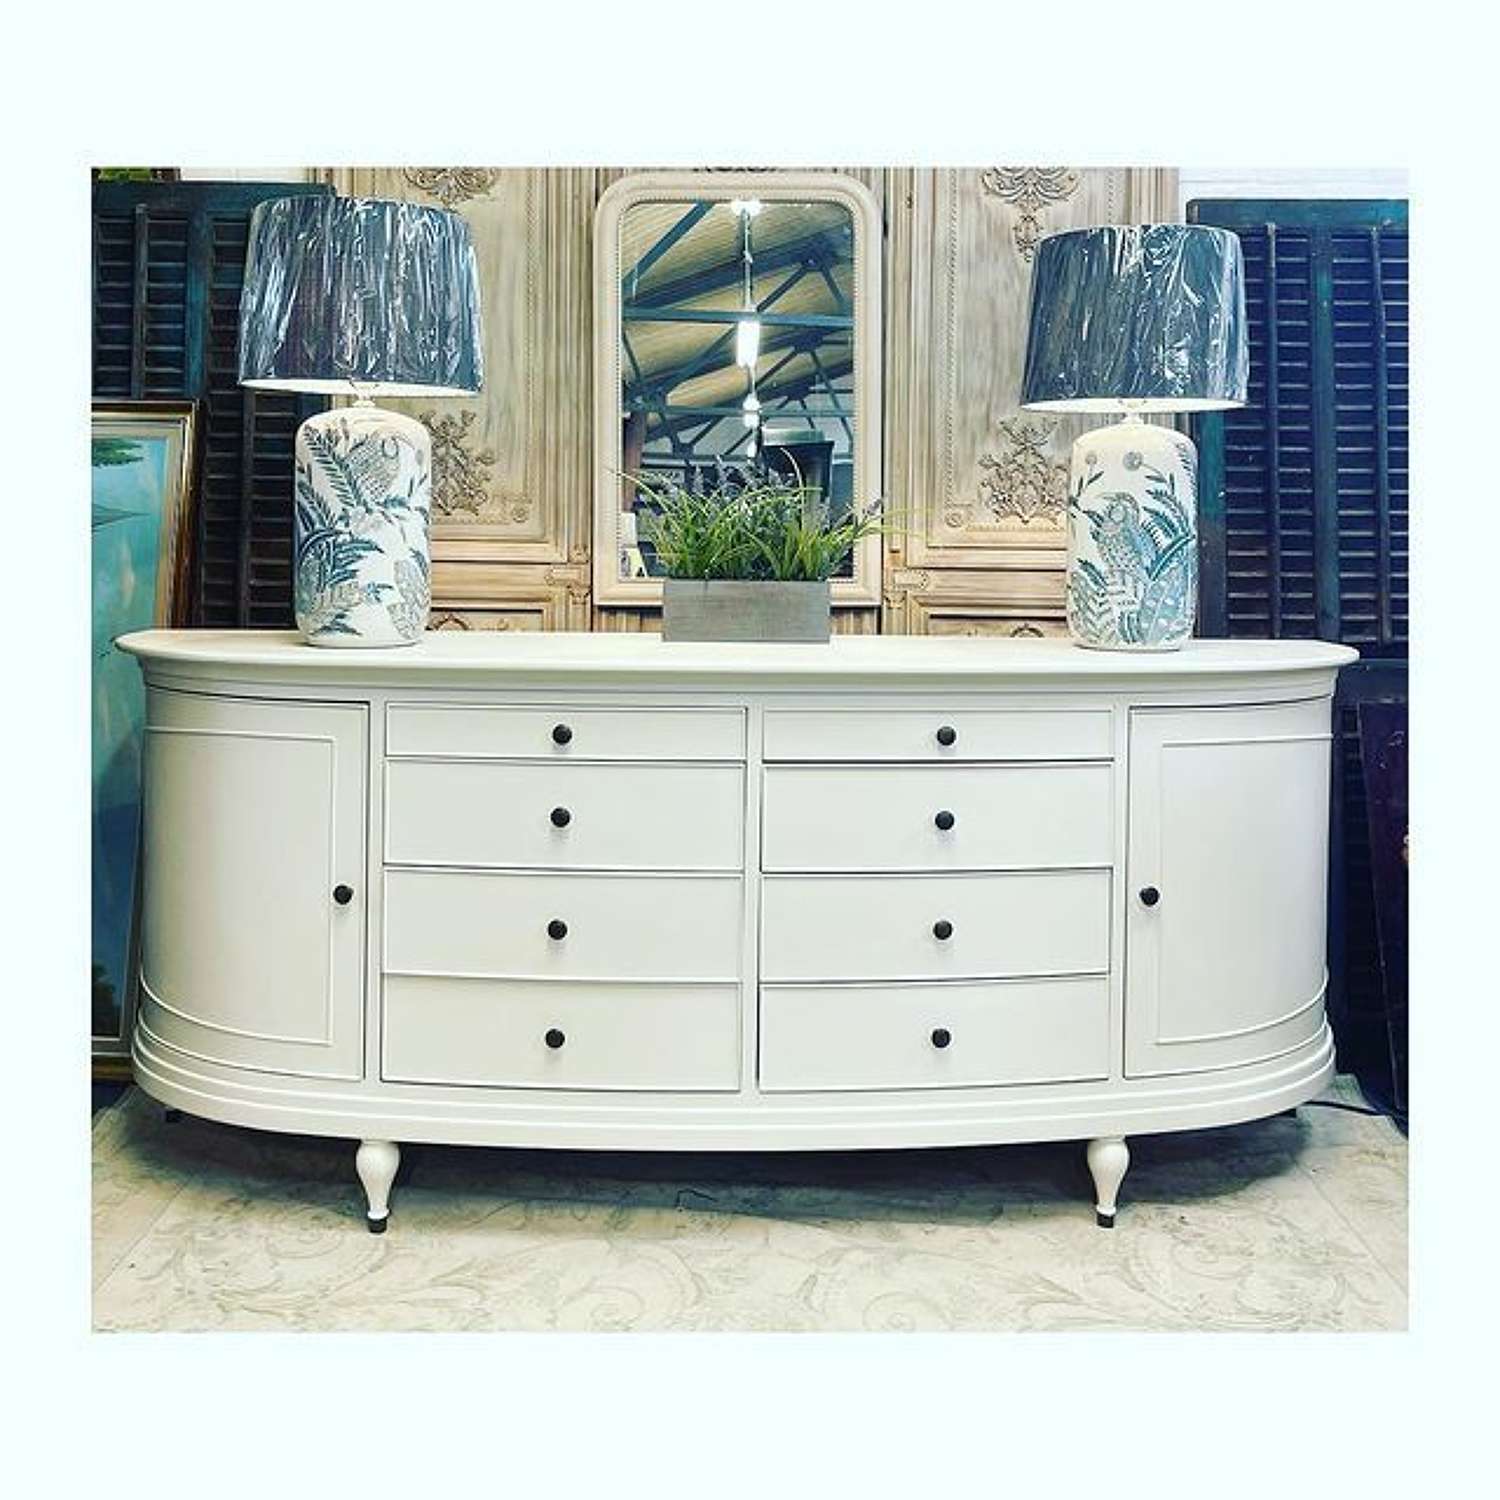 Curved sideboard